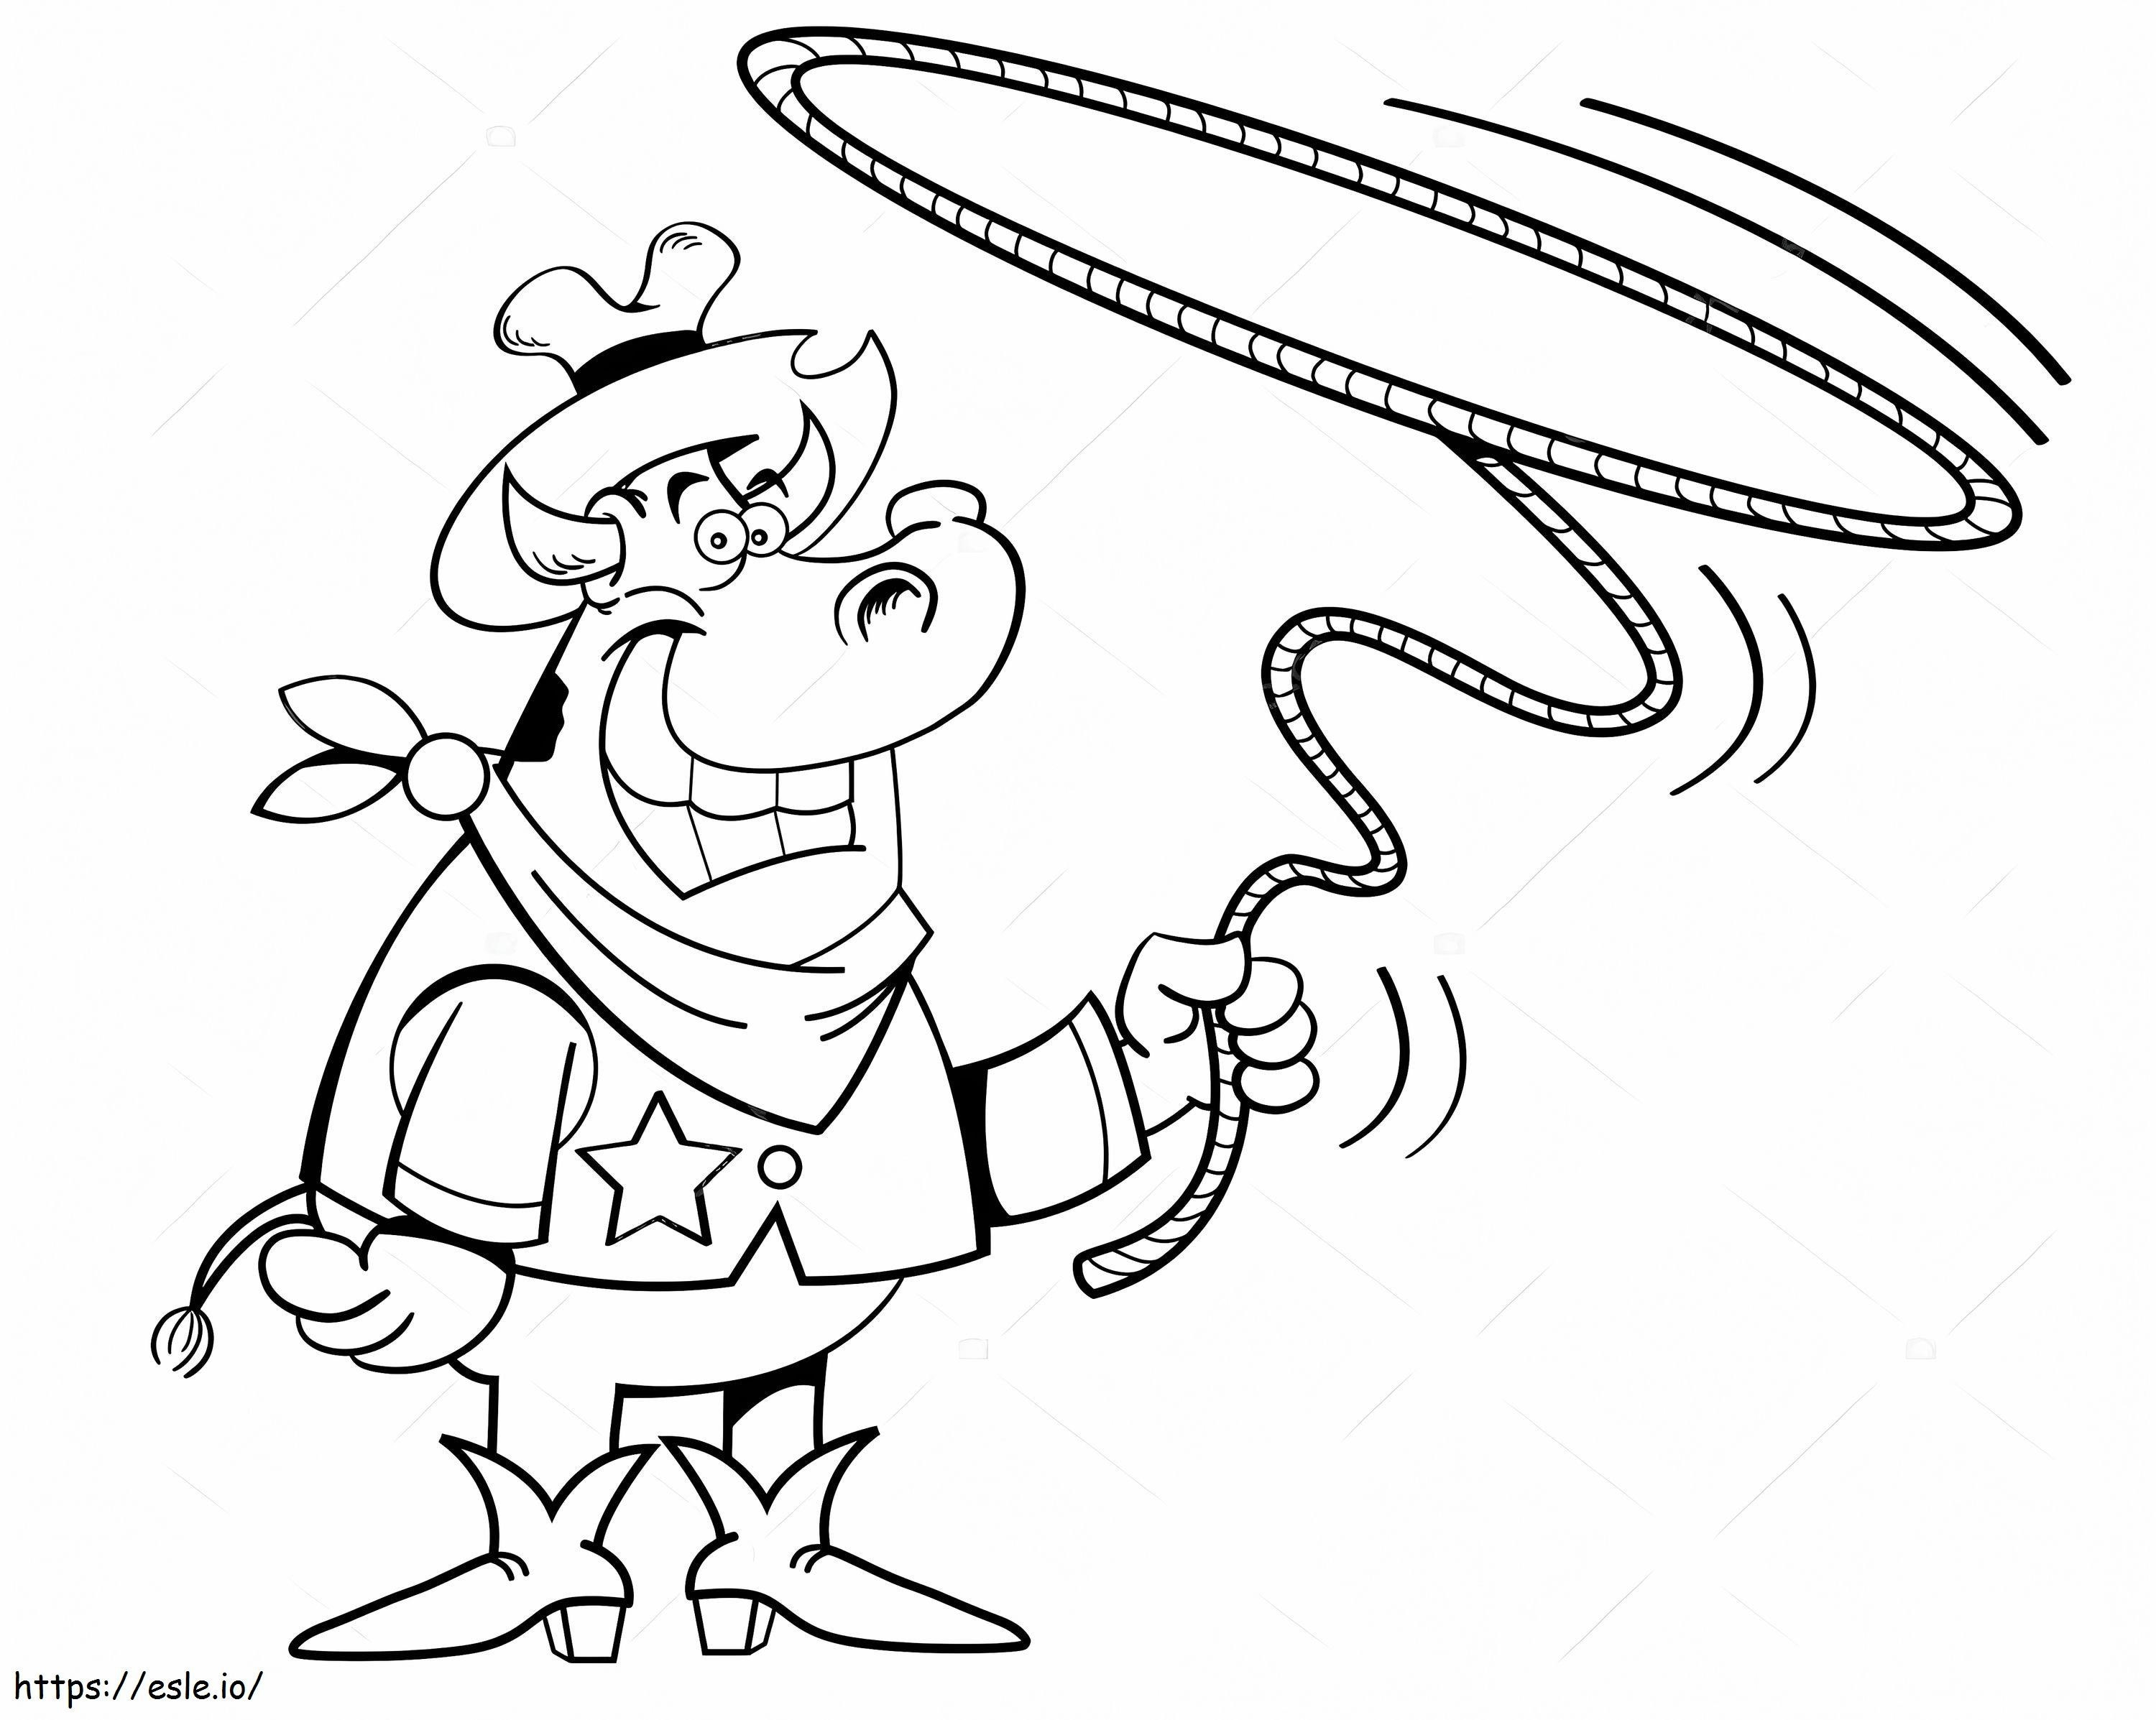 1555115442 Depositphotos 13838517 Stock Illustration Lariat Cow coloring page